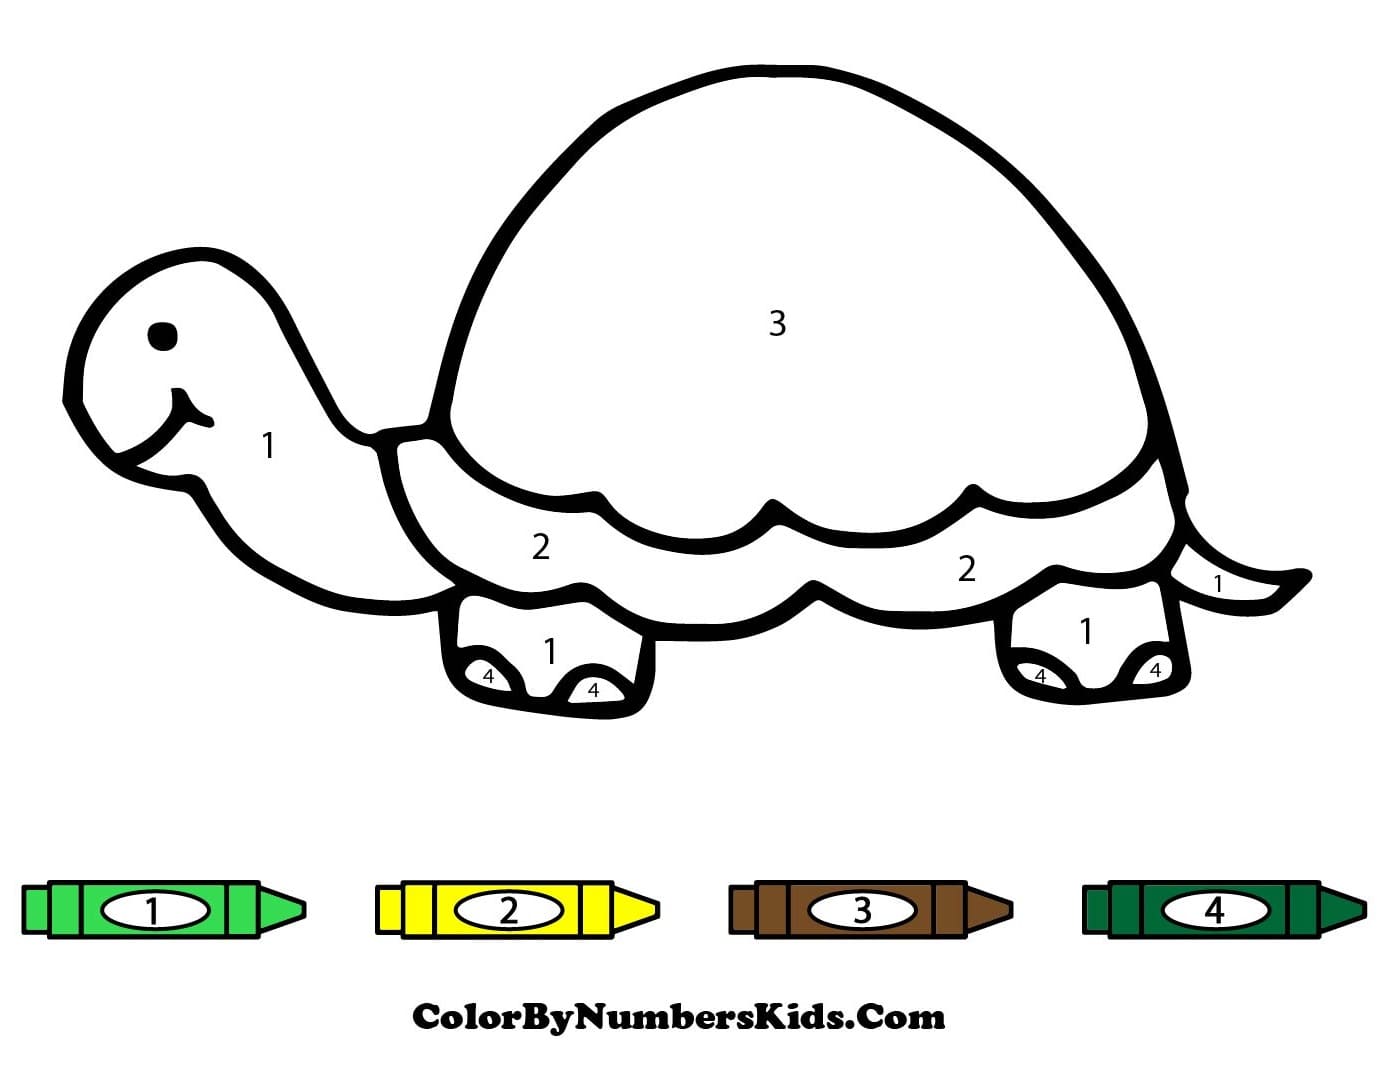 Turtle Color By Number for Kids